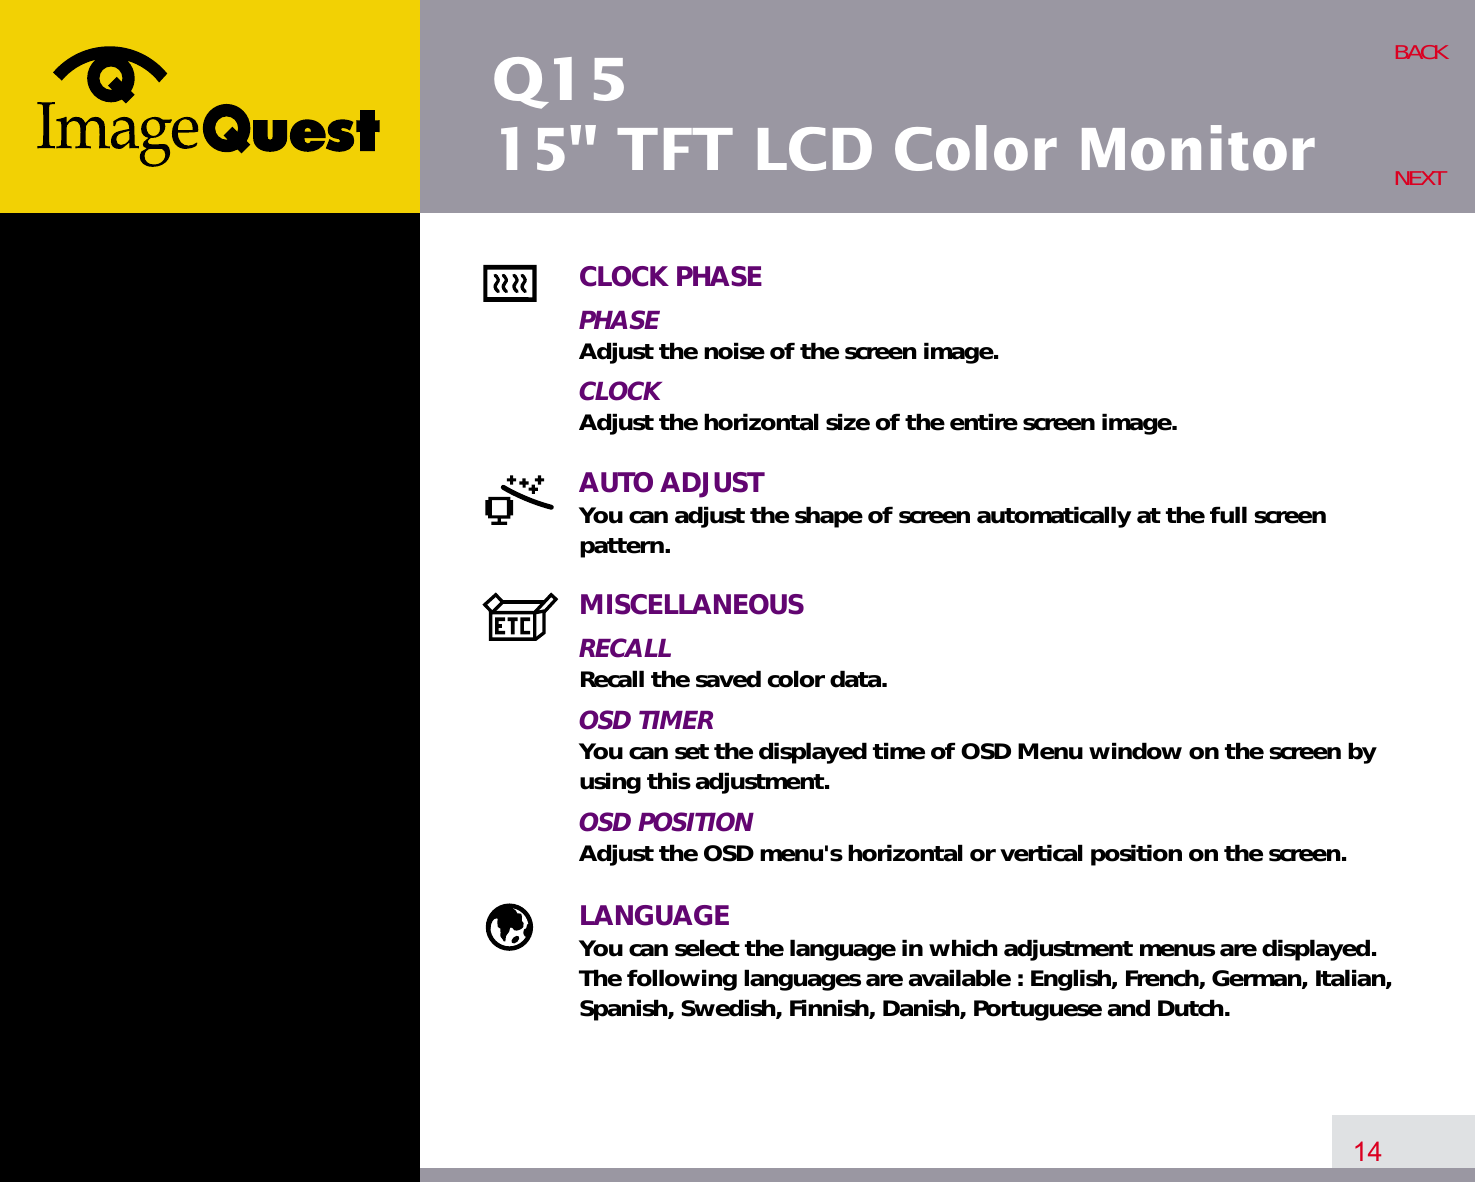 Q1515&quot; TFT LCD Color Monitor14BACKNEXTCLOCK PHASEPHASEAdjust the noise of the screen image.CLOCKAdjust the horizontal size of the entire screen image.AUTO ADJUSTYou can adjust the shape of screen automatically at the full screenpattern.MISCELLANEOUSRECALLRecall the saved color data.OSD TIMERYou can set the displayed time of OSD Menu window on the screen byusing this adjustment.OSD POSITIONAdjust the OSD menu&apos;s horizontal or vertical position on the screen.LANGUAGEYou can select the language in which adjustment menus are displayed. The following languages are available : English, French, German, Italian,Spanish, Swedish, Finnish, Danish, Portuguese and Dutch.